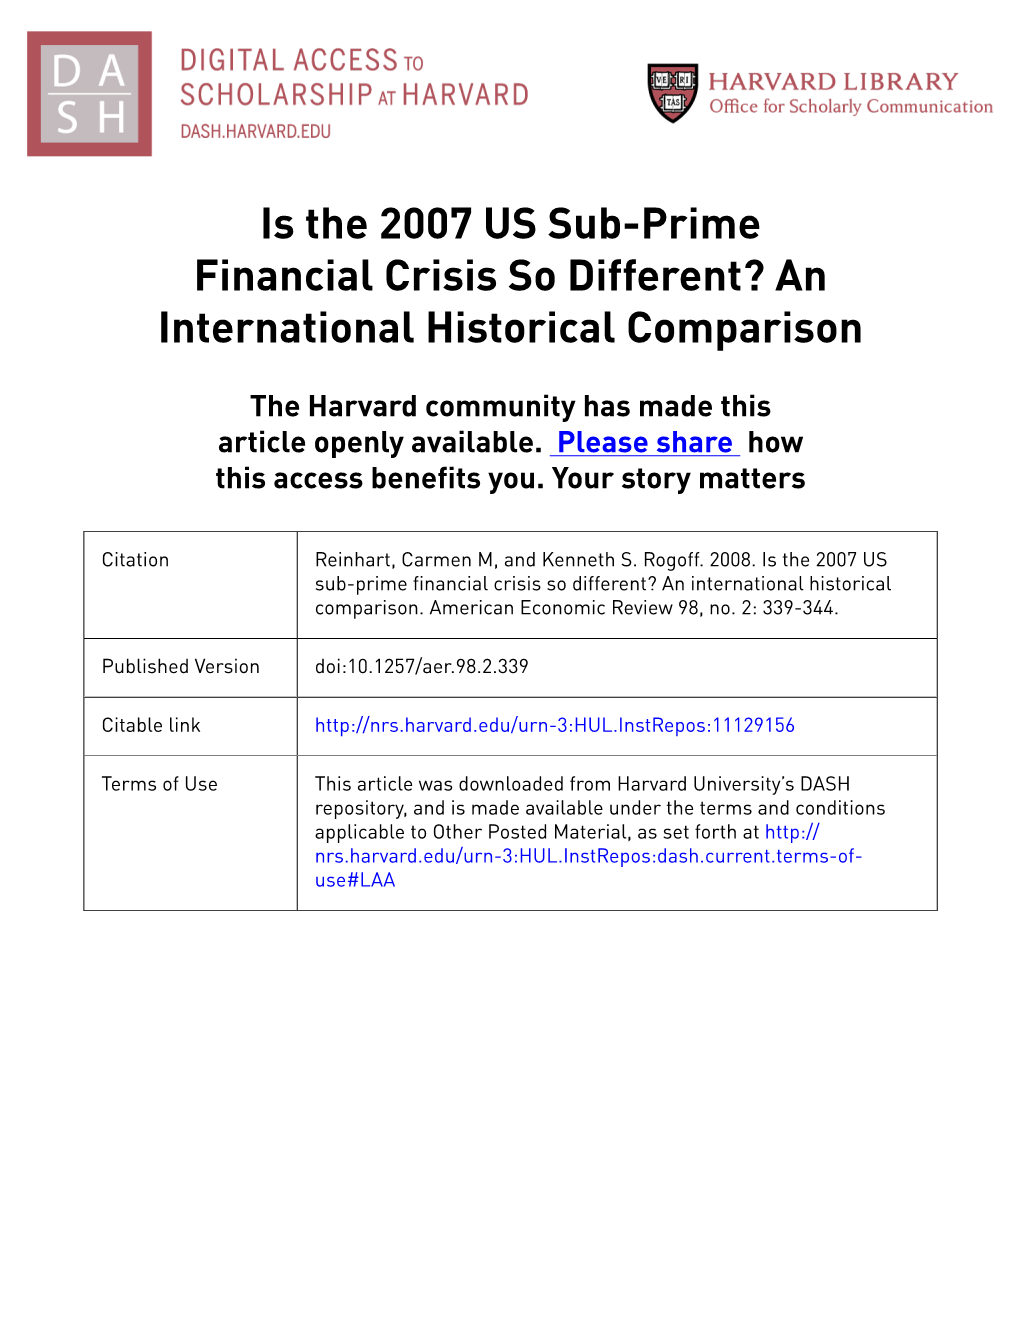 Is the 2007 US Sub-Prime Financial Crisis So Different? an International Historical Comparison